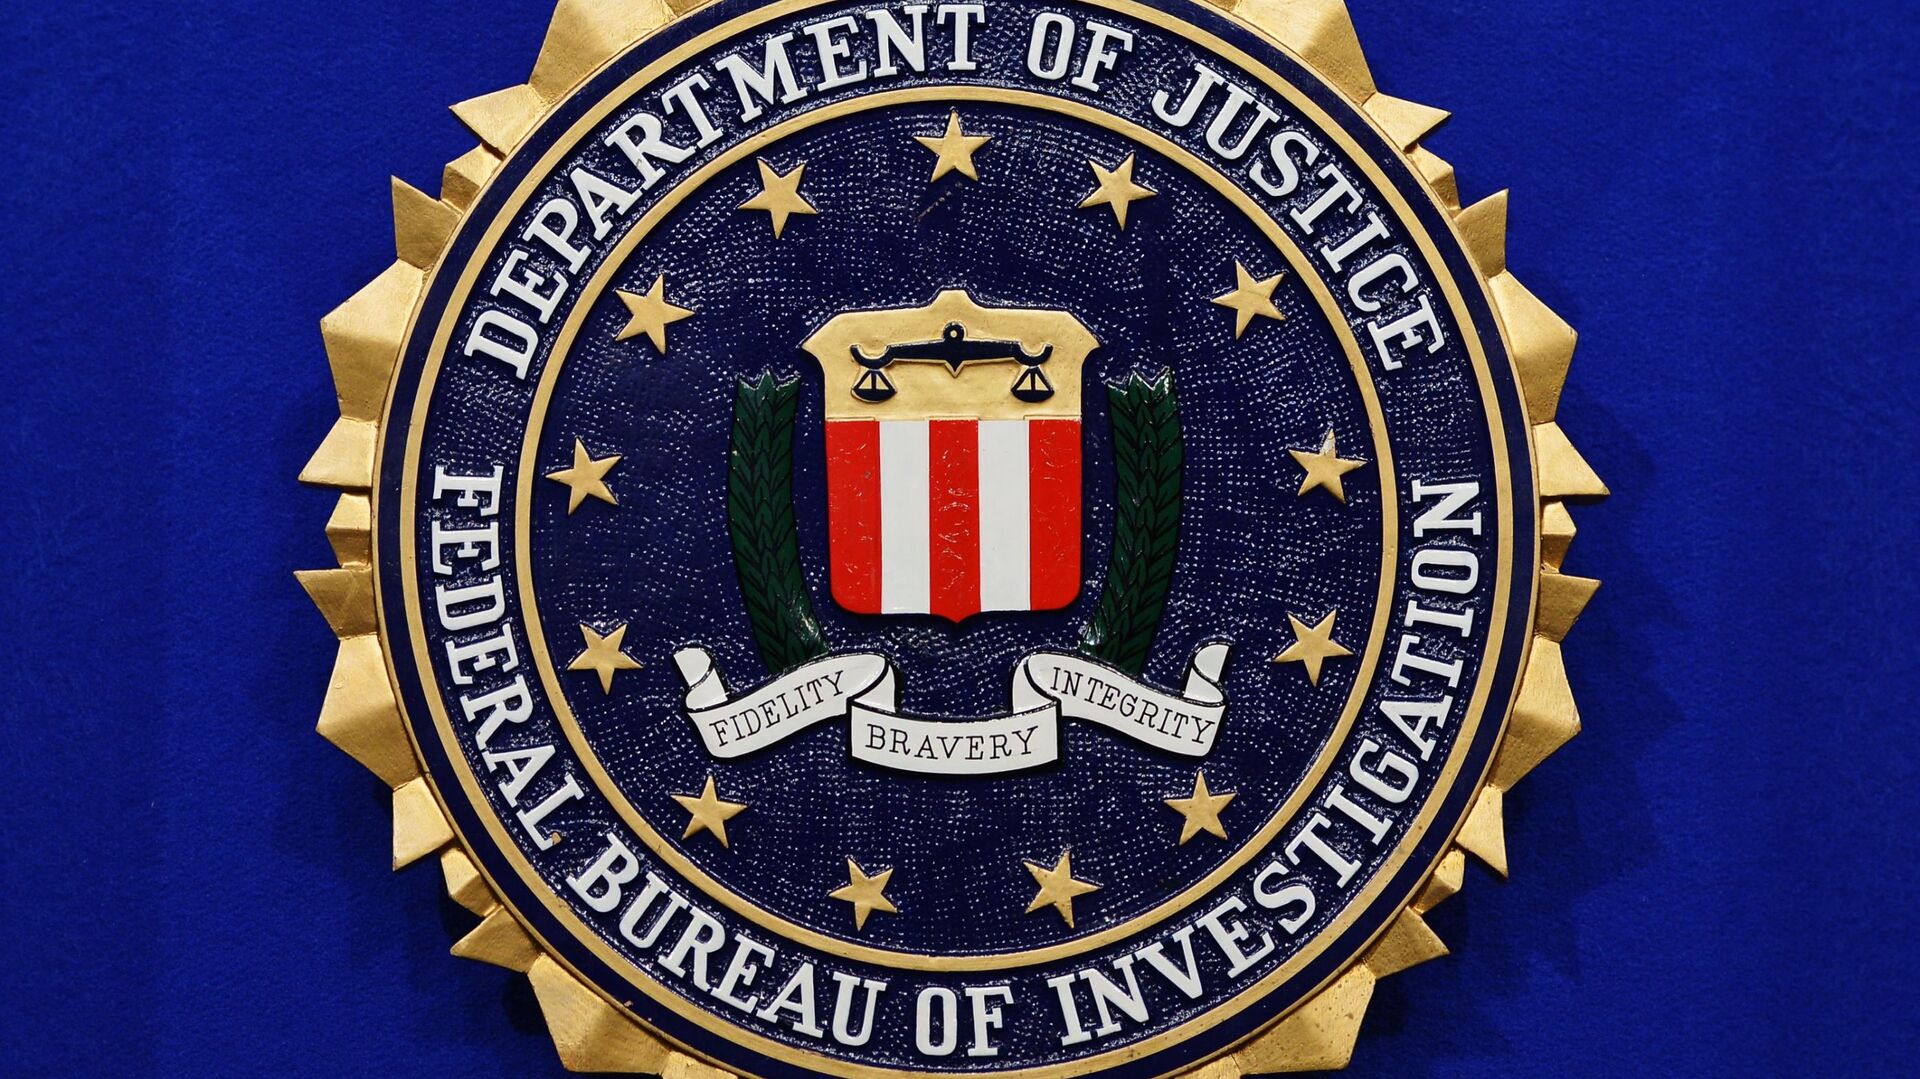 The Federal Bureau of Investigation (FBI) seal is seen on the lectern following a press conference announcing the FBI's 499th and 500th additions to the Ten Most Wanted Fugitives list on June 17, 2013 at the Newseum in Washington, DC.  - Sputnik International, 1920, 15.12.2021